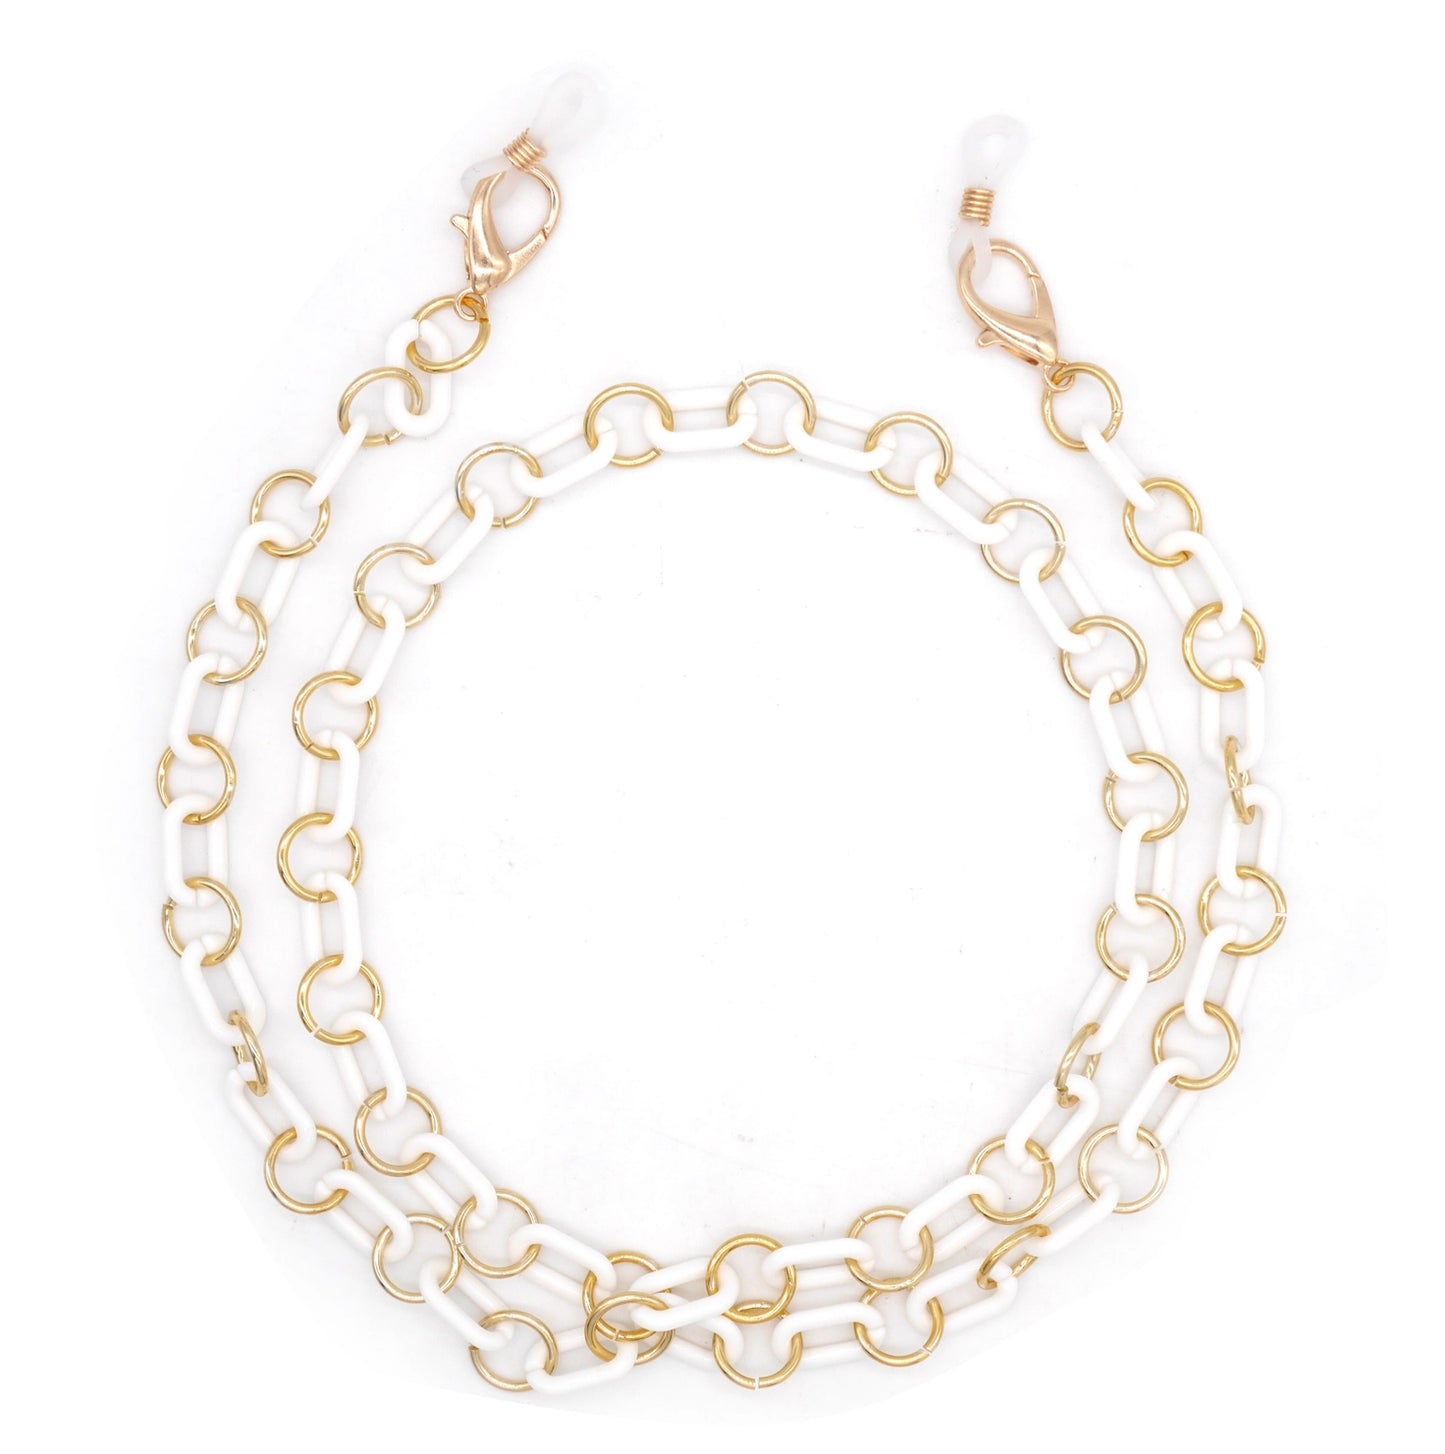 Sunglass chain or eyeglass chain with alternating white and gold links